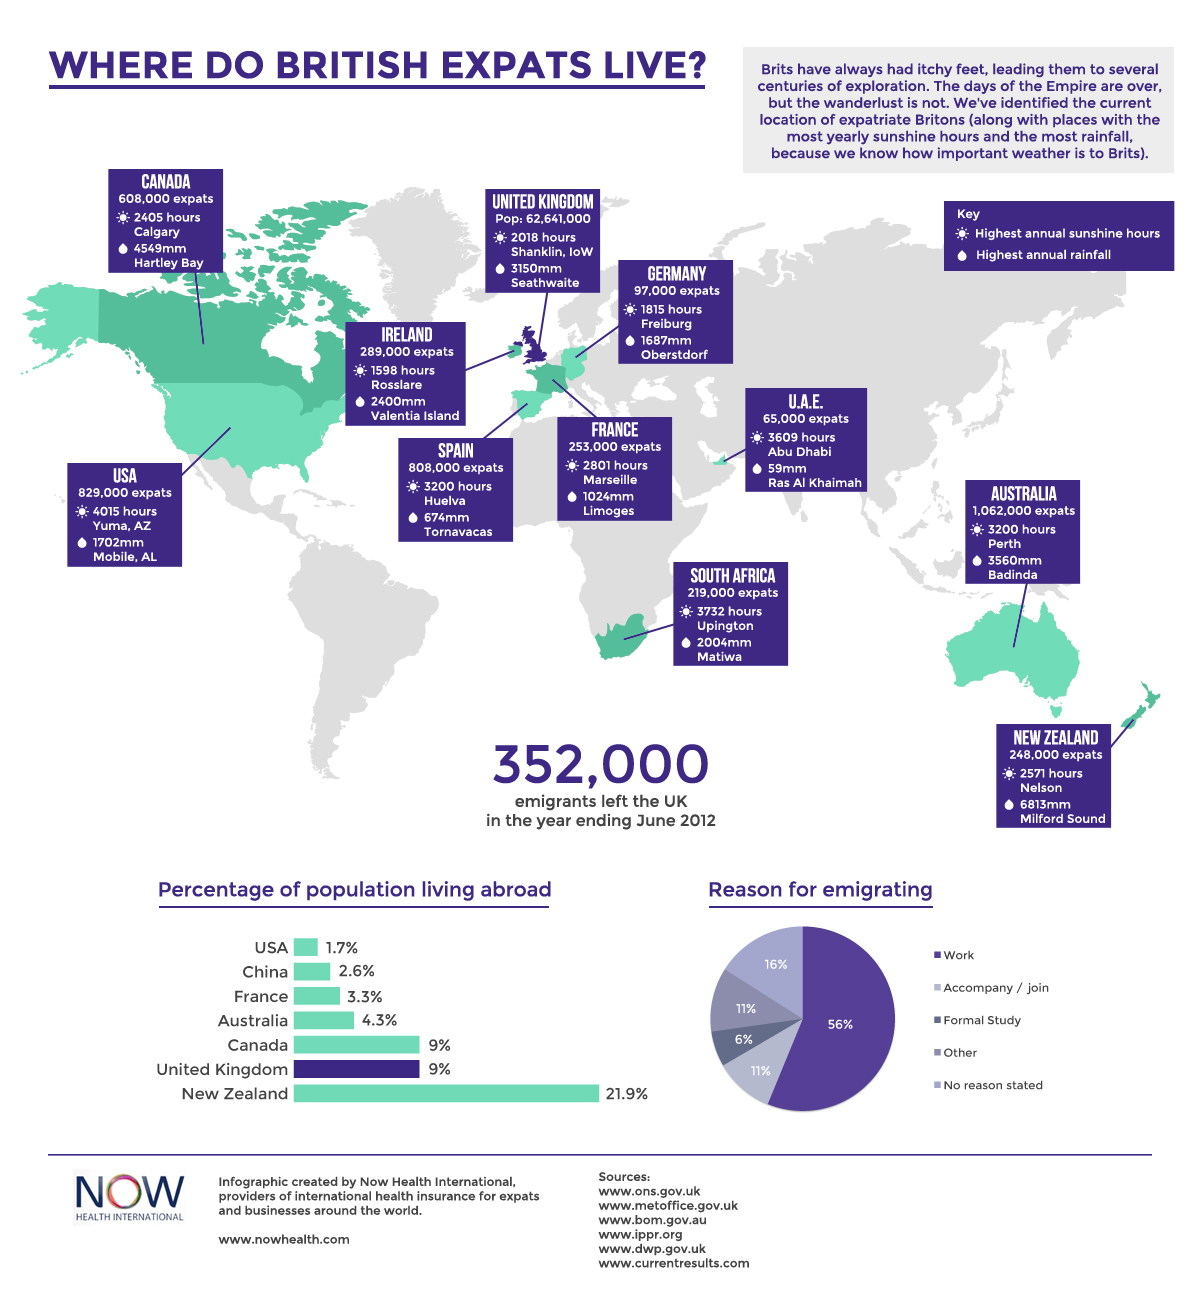 Where Do British Expats Live? - Infographic